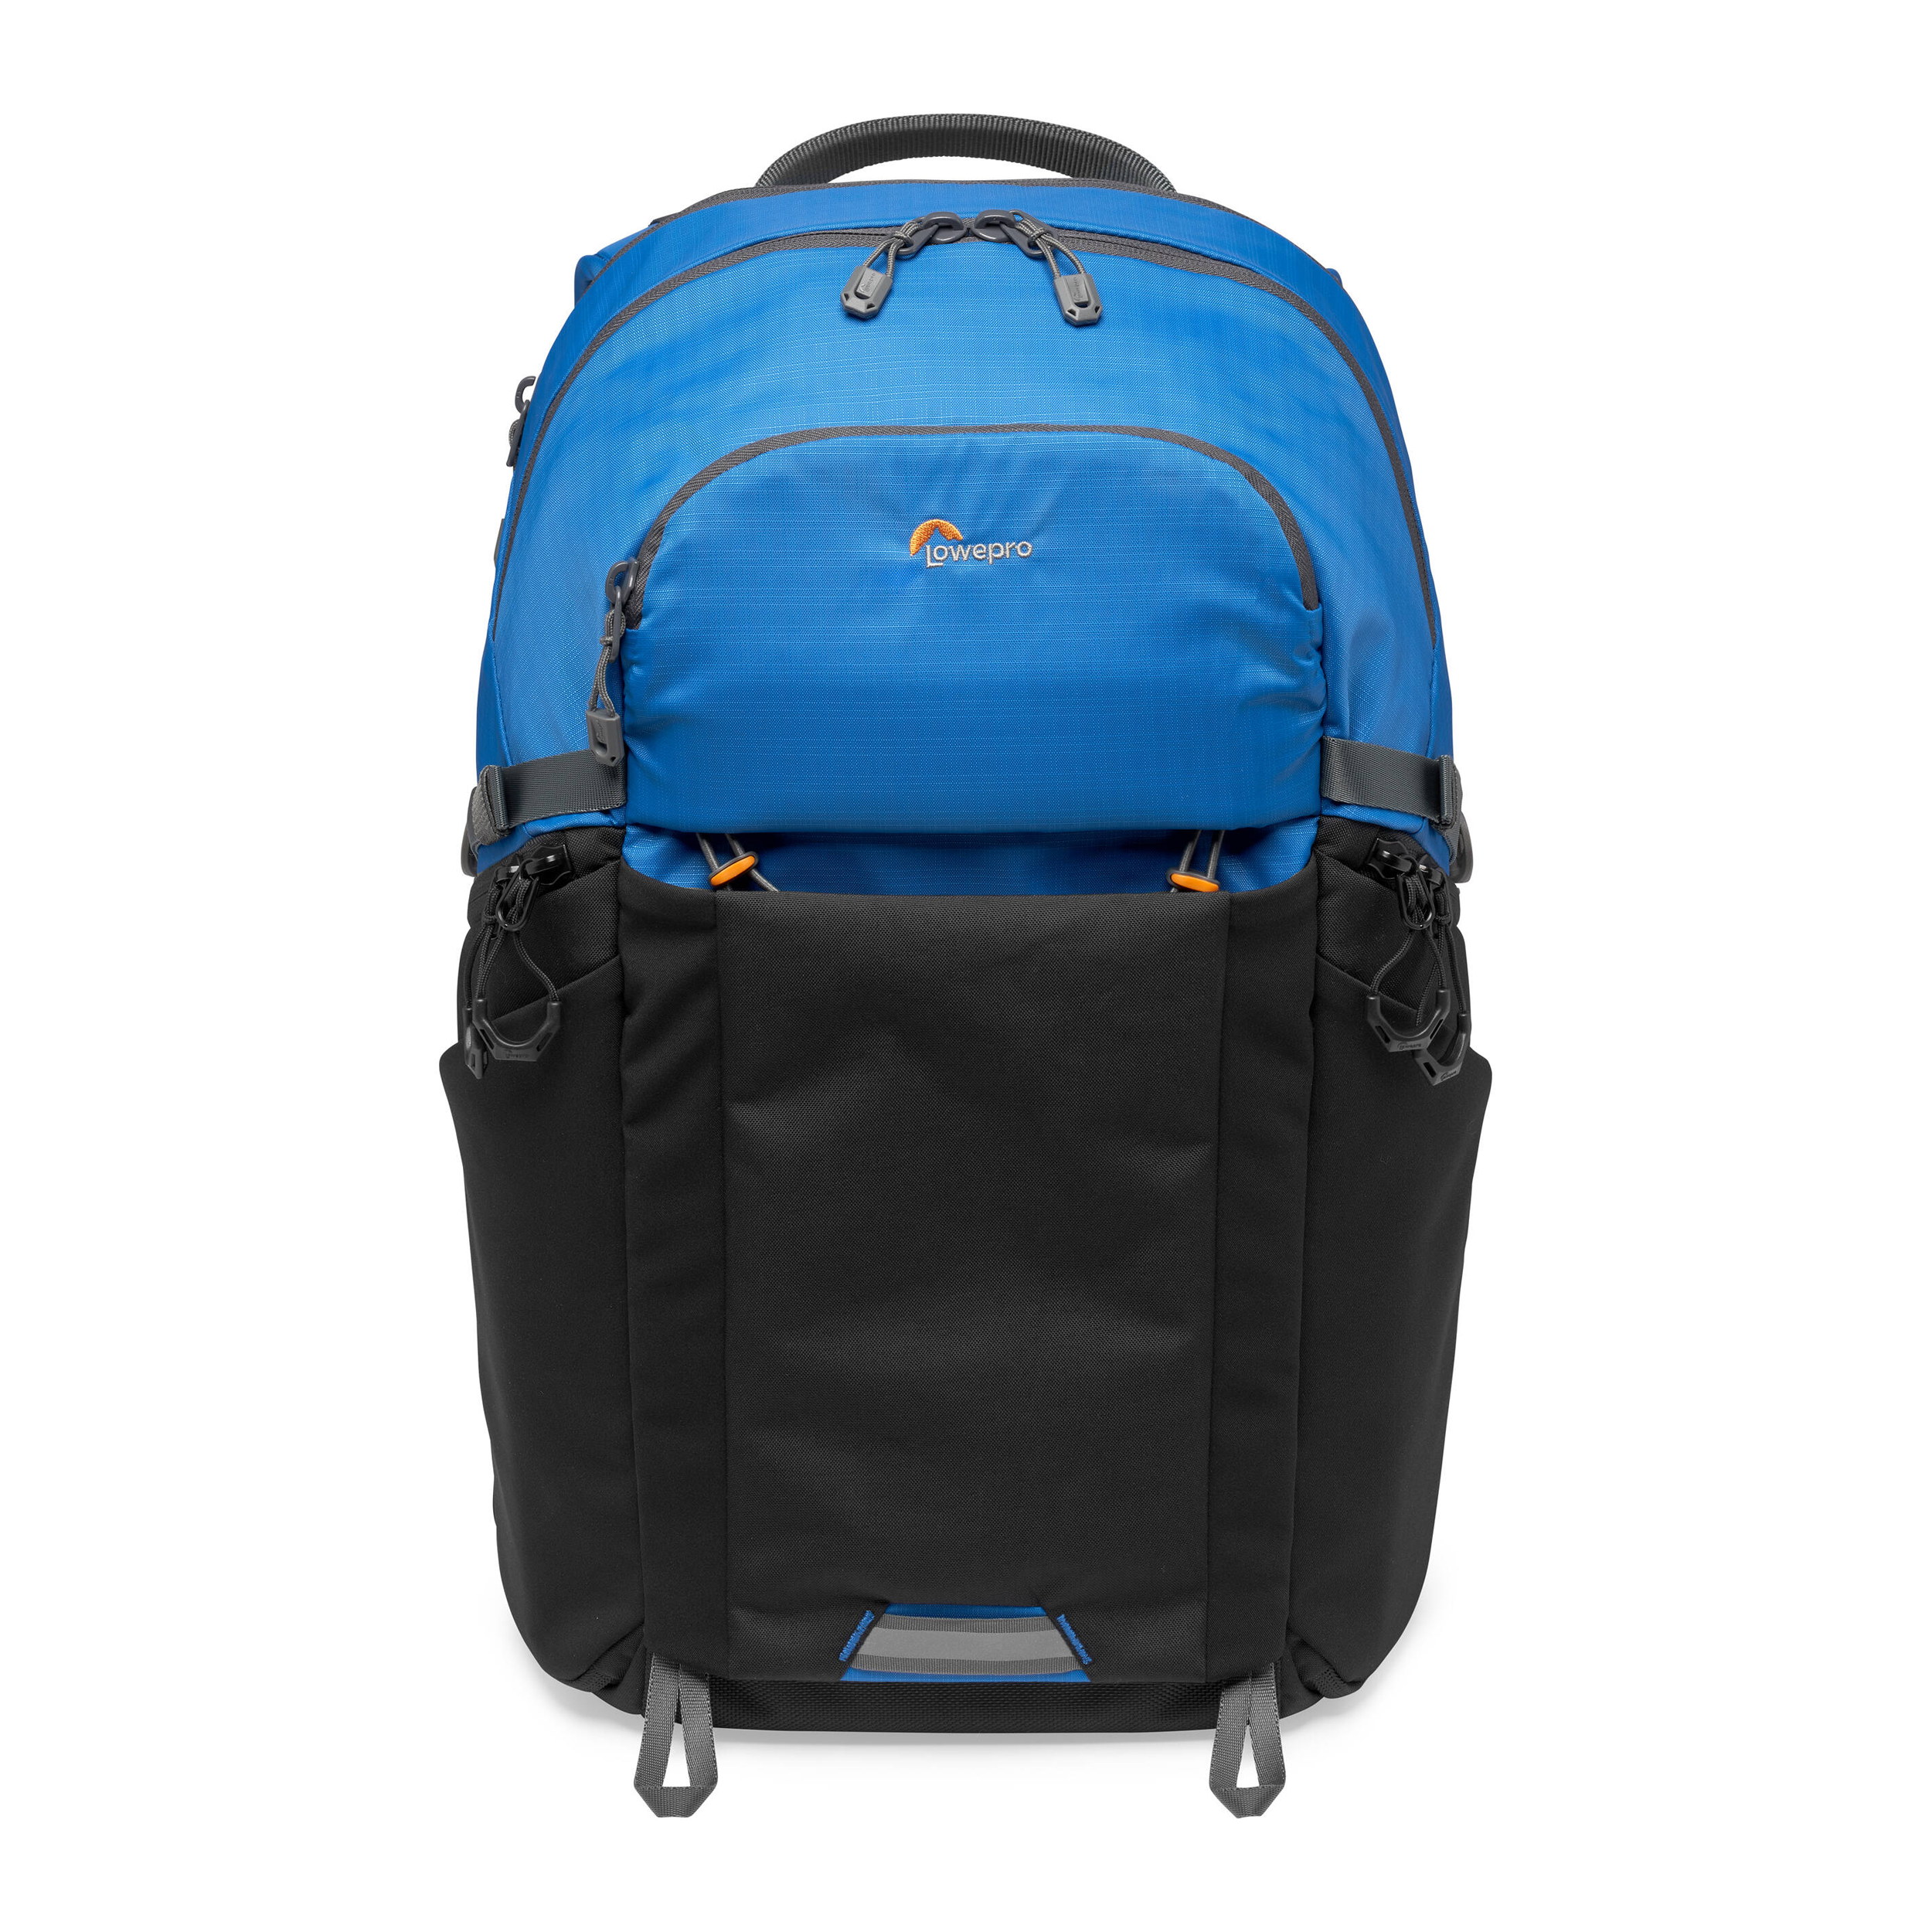 Lowepro Photo Active BP Backpack - 200 AW / Blue